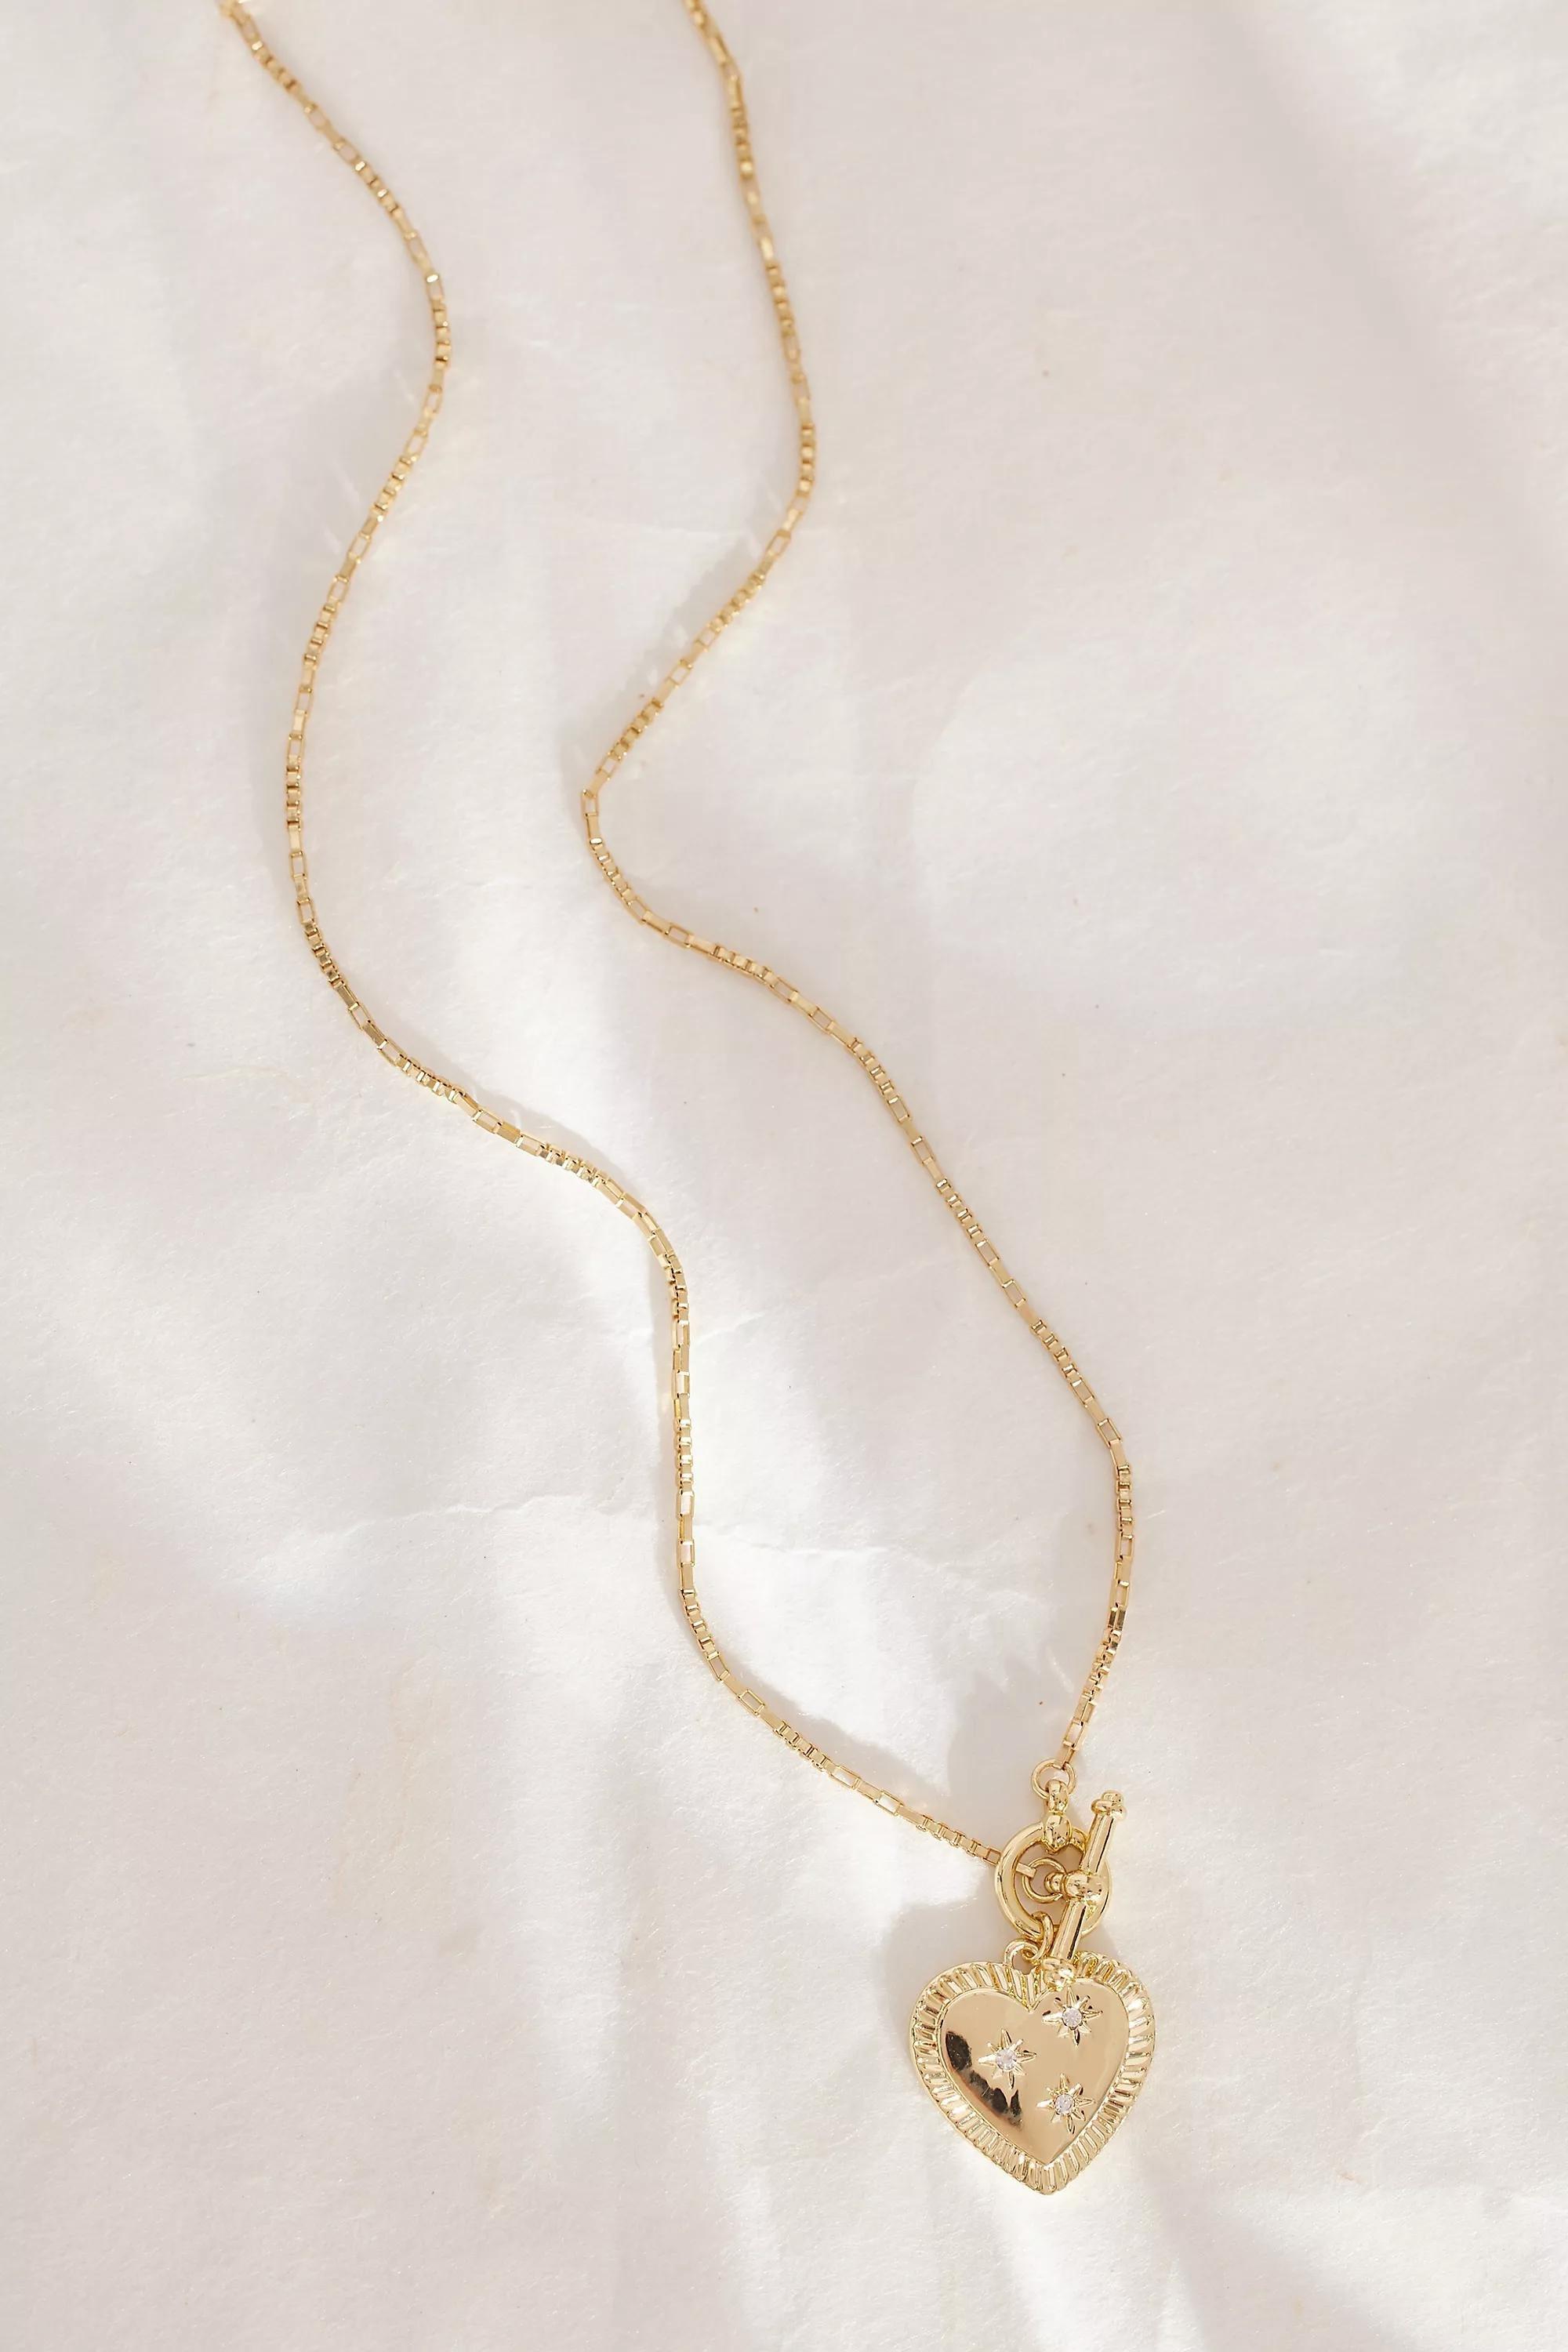 Anthropologie - Heart Charm T-Bar Necklace, Gold